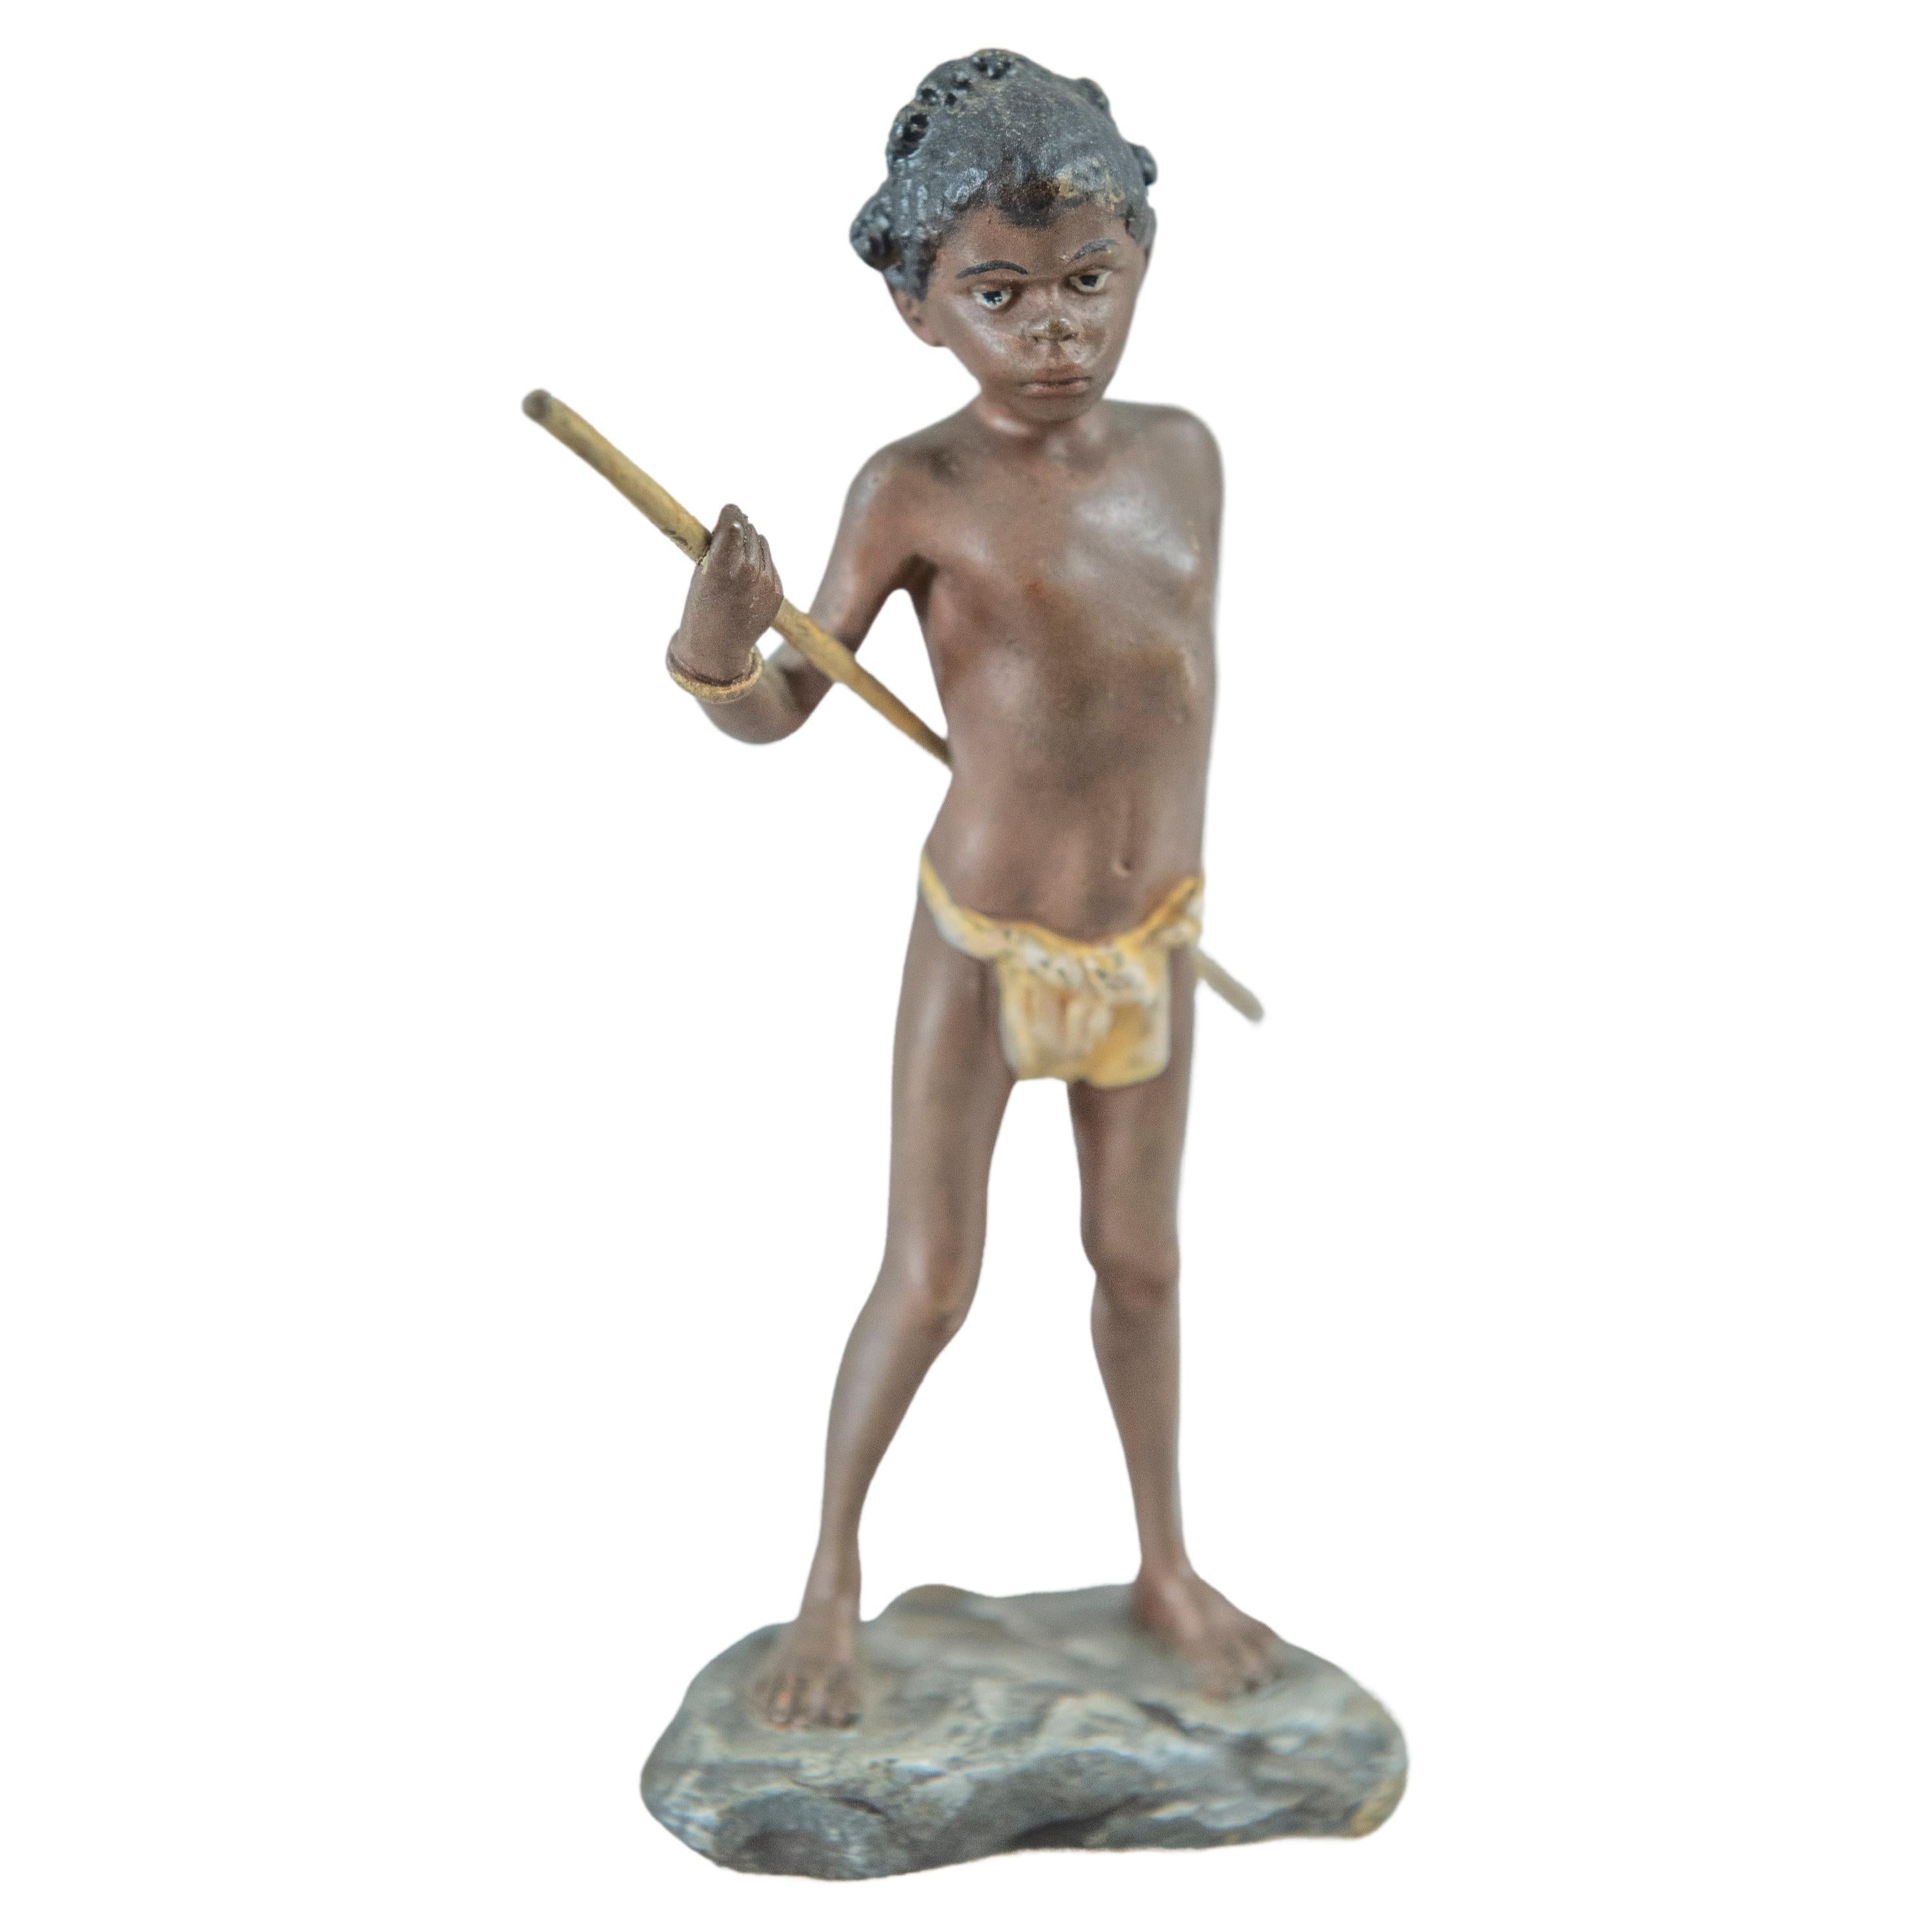 Cold Painted Vienna Bronze Young Boy, Signed Bergmann Foundry, ca. 1900